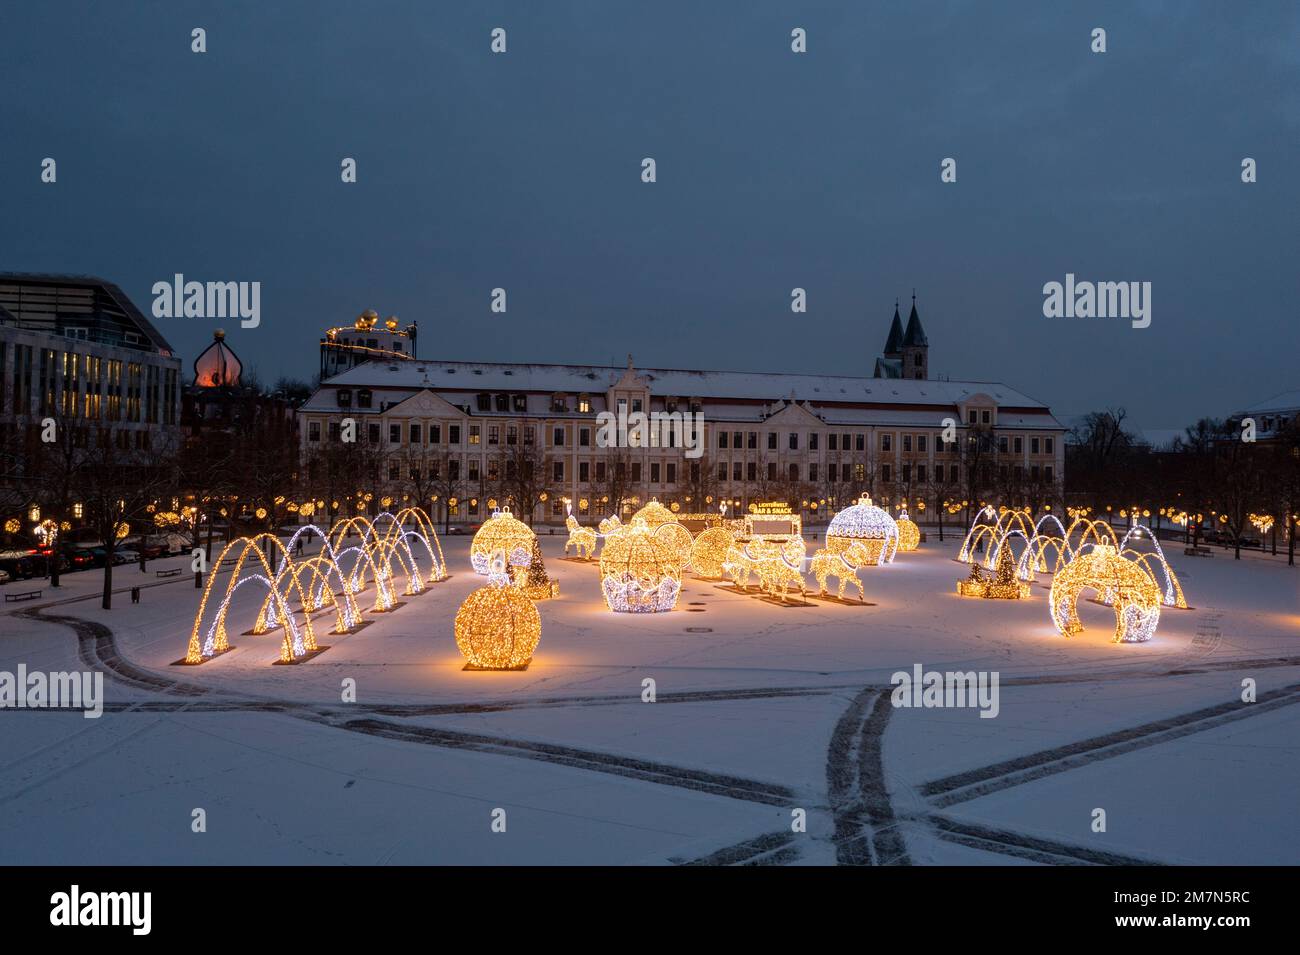 Snow covered cathedral square with Saxony-Anhalt state parliament, glowing Christmas trees, glowing Christmas balls, Christmas world of lights, Magdeburg, Saxony-Anhalt, Germany Stock Photo